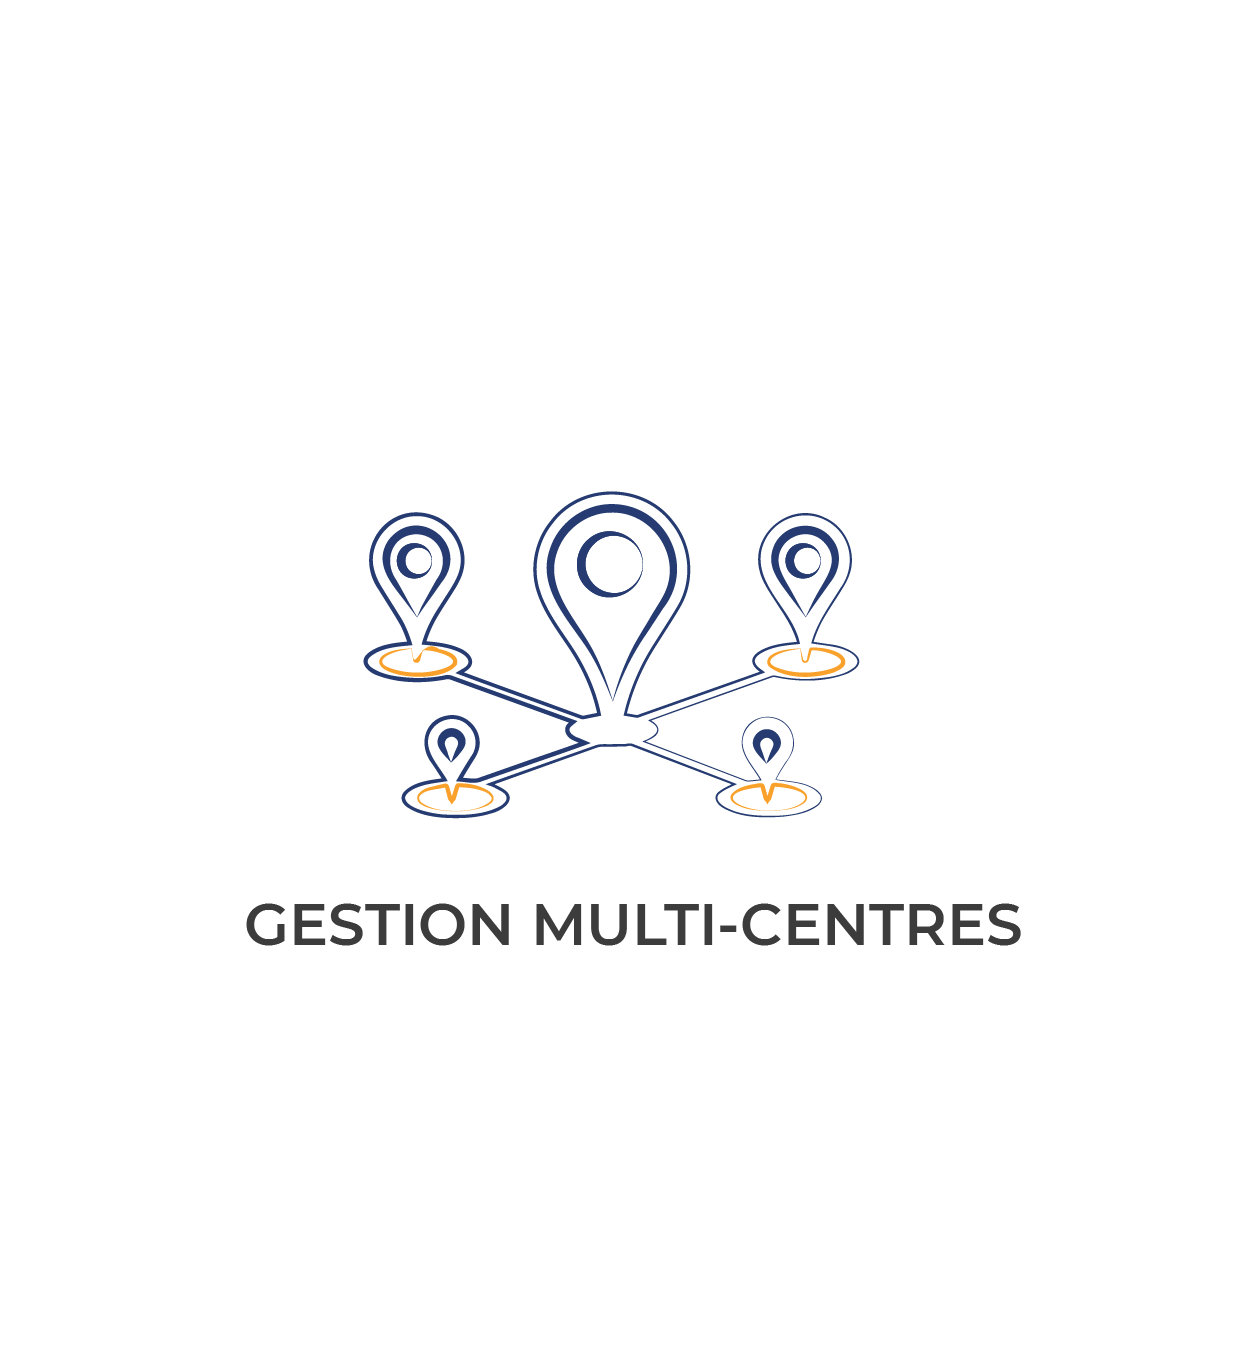 gestion multi-centres